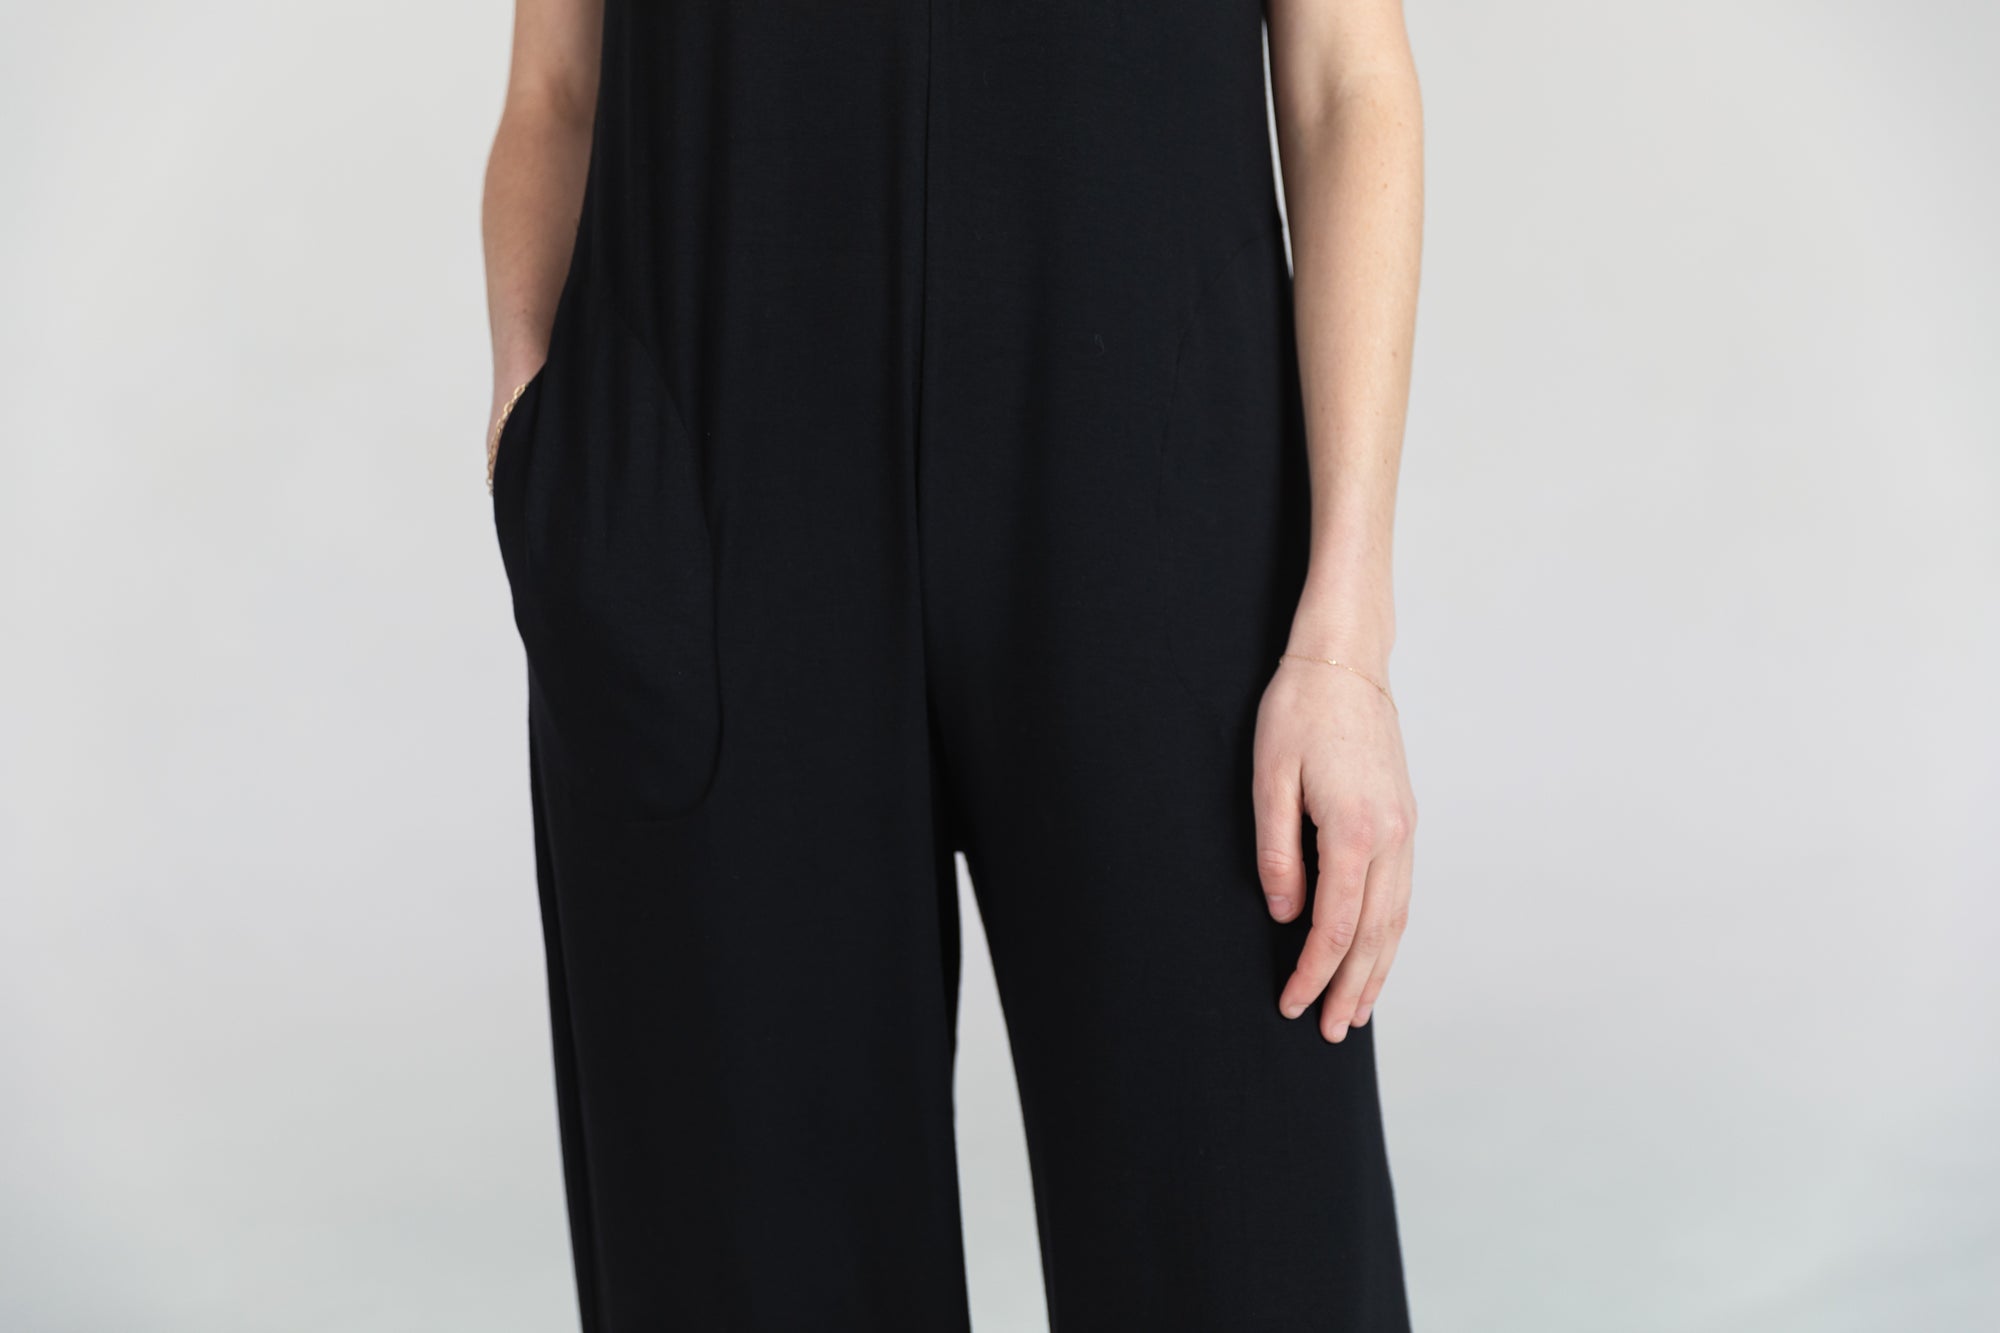 The Anywear Jumpsuit in Onyx